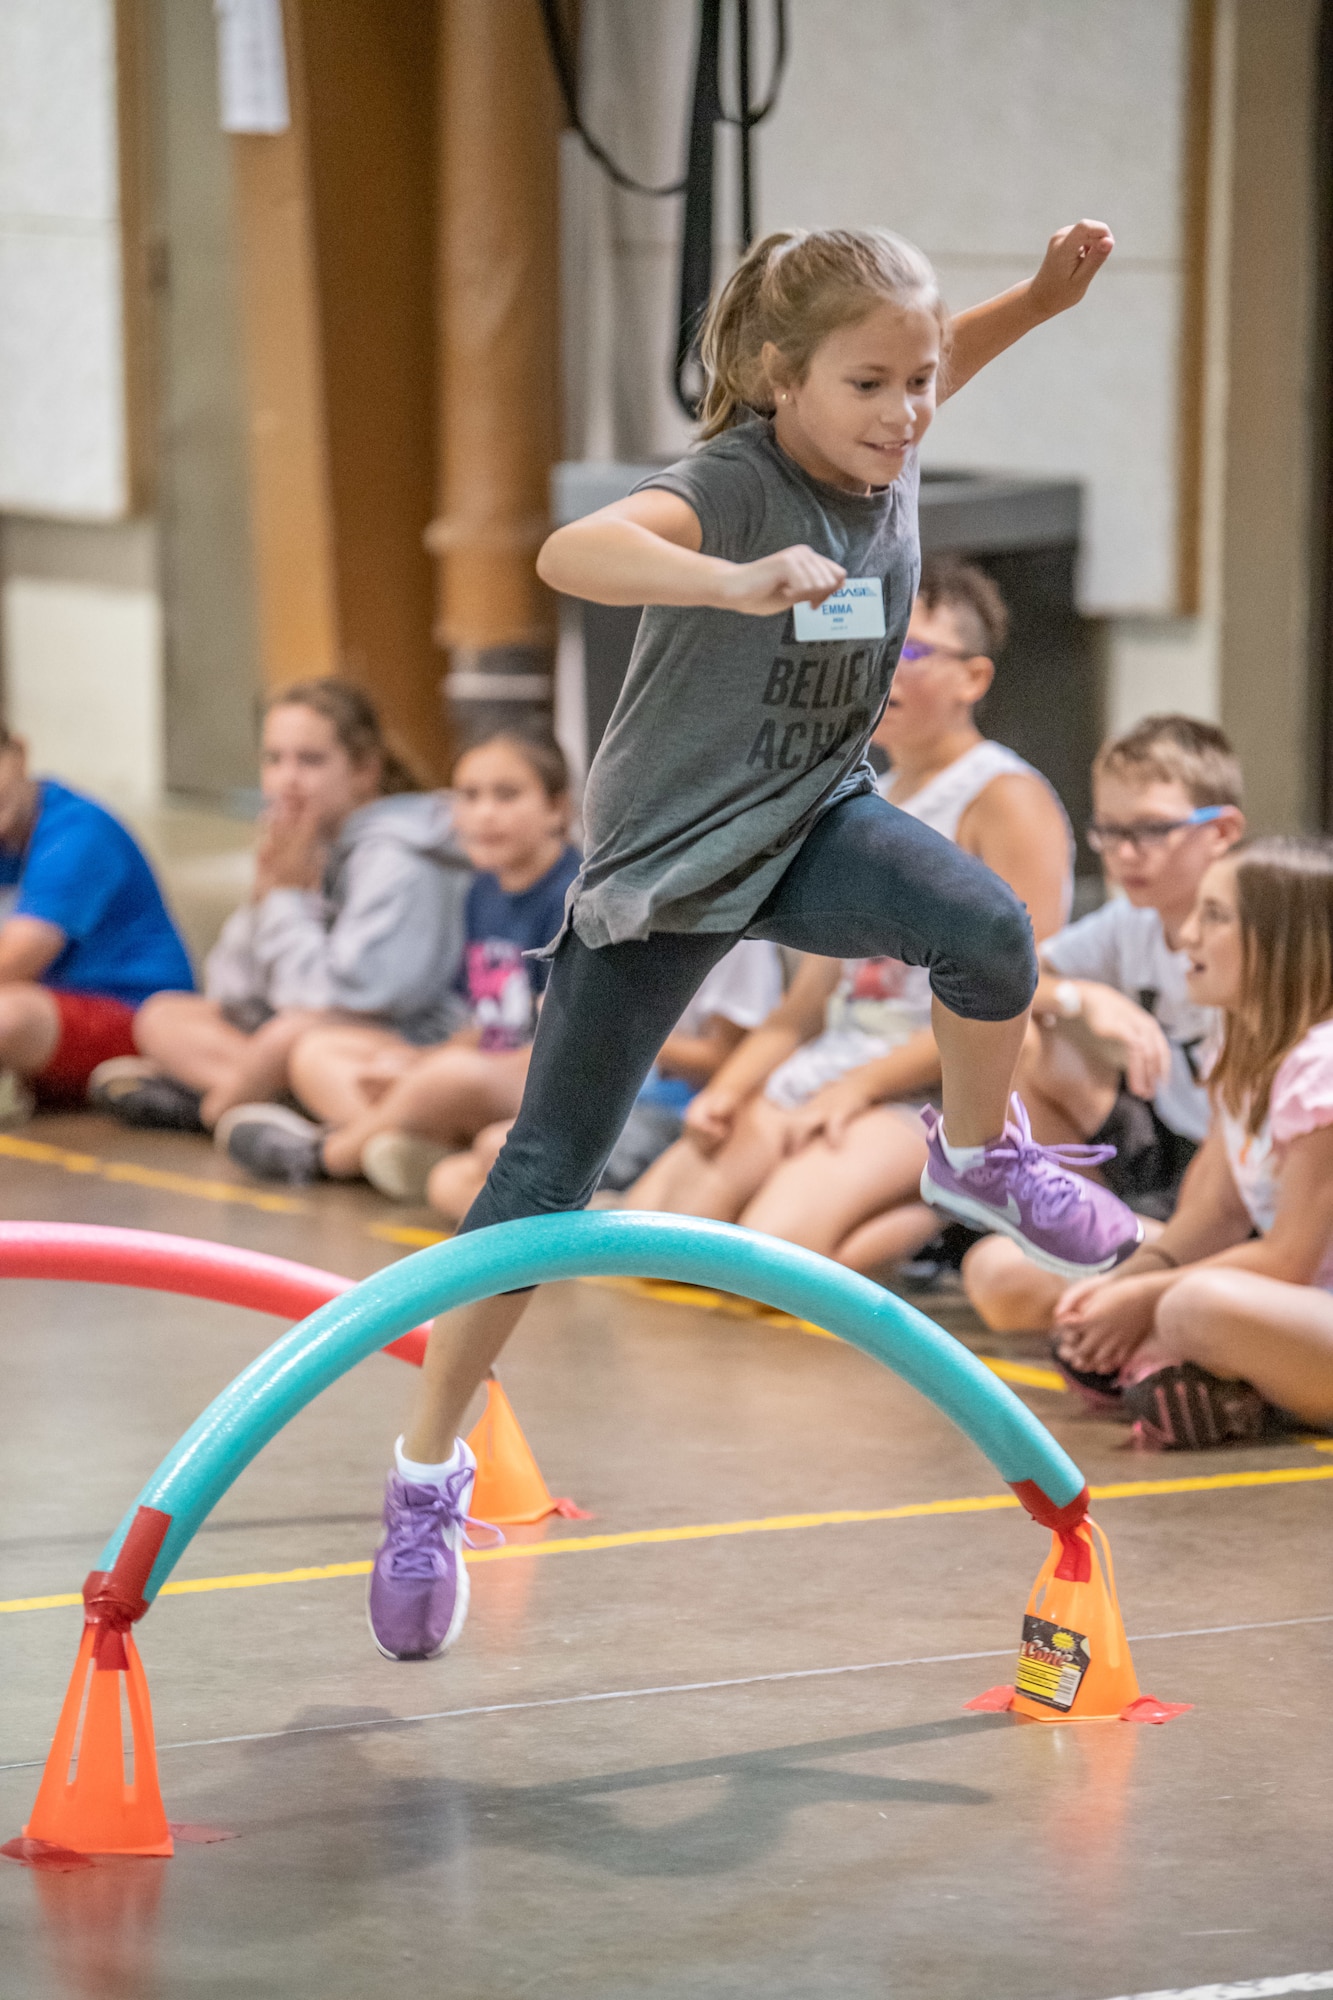 A camper participates in an agility obstacle course during the Starbase summer camp June 10, 2019, in Charleston, W.Va.  The Starbase camp was held June 10-14, 2019, and is designed for children of military members giving them opportunities to bond with children from other military families. (U.S. Army National Guard photo by Edwin L Wriston)